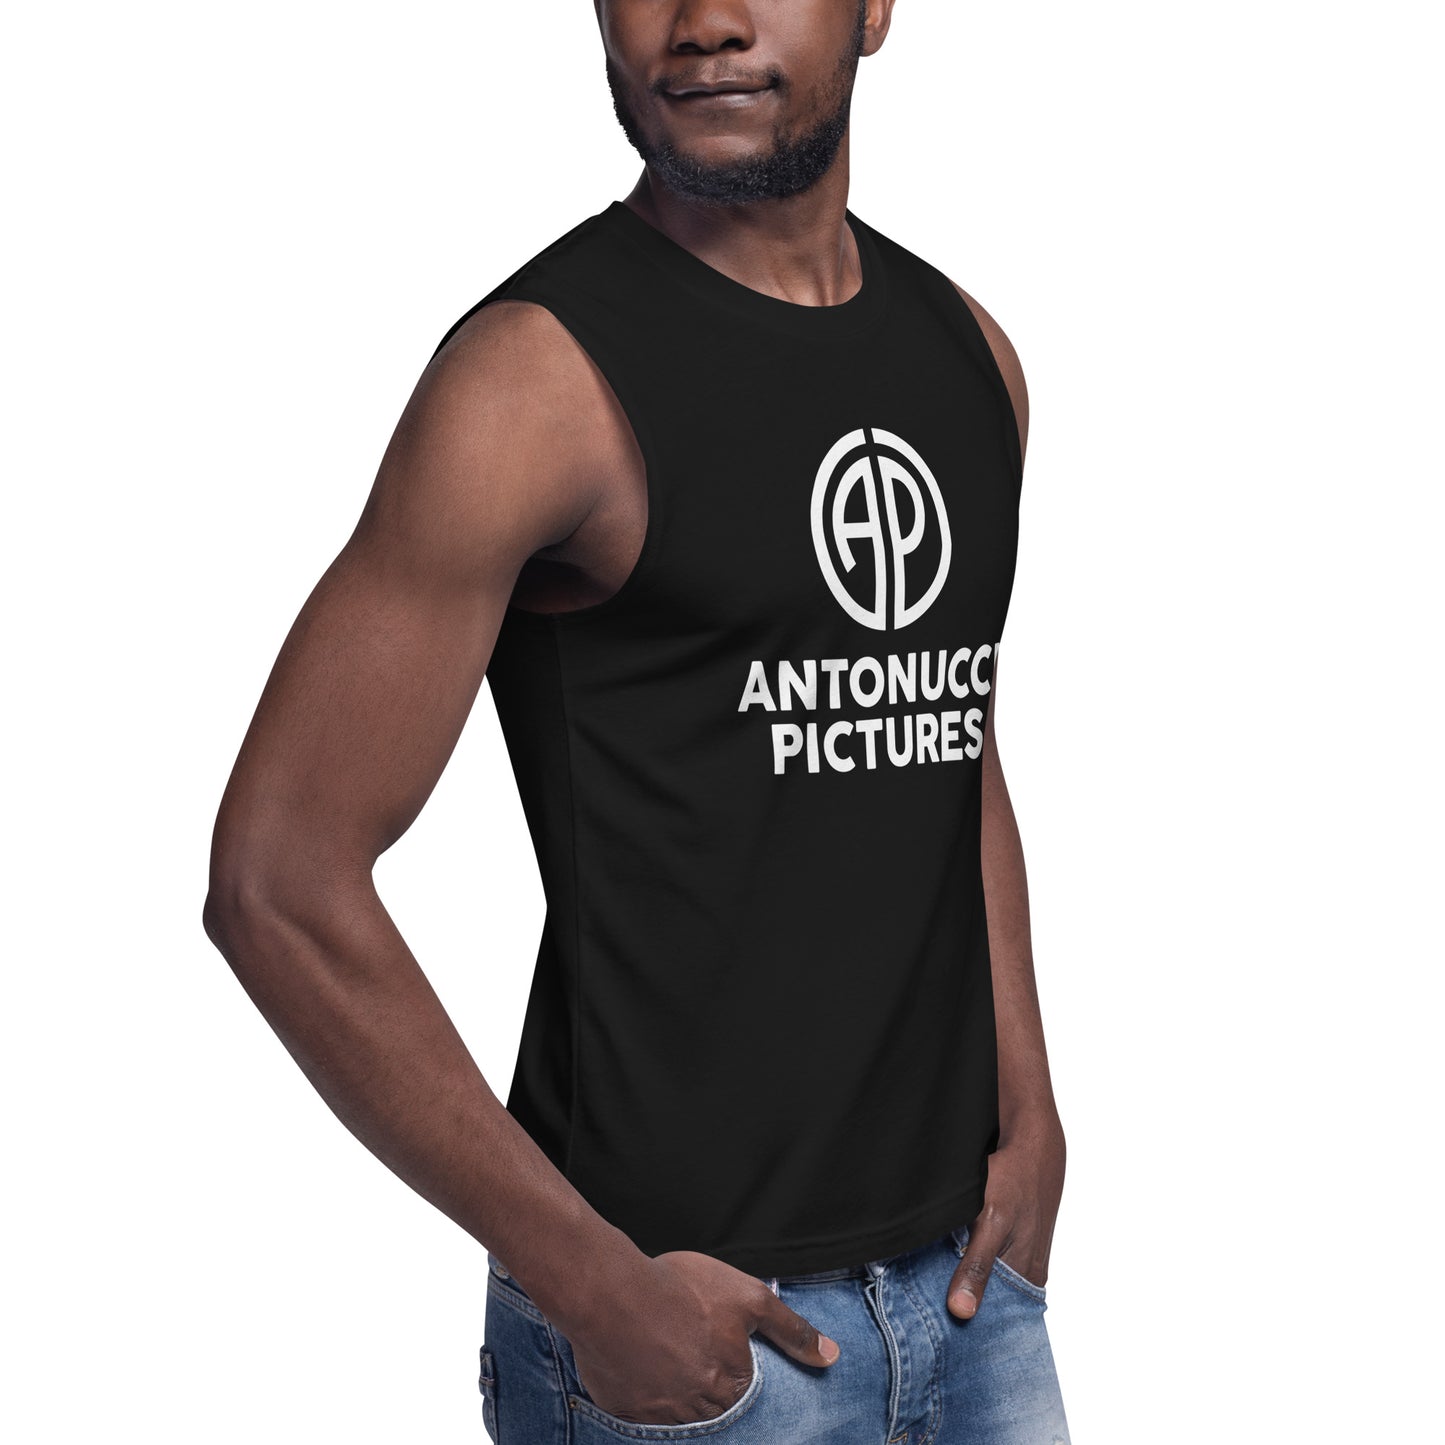 Antonucci Pictures Muscle Shirt